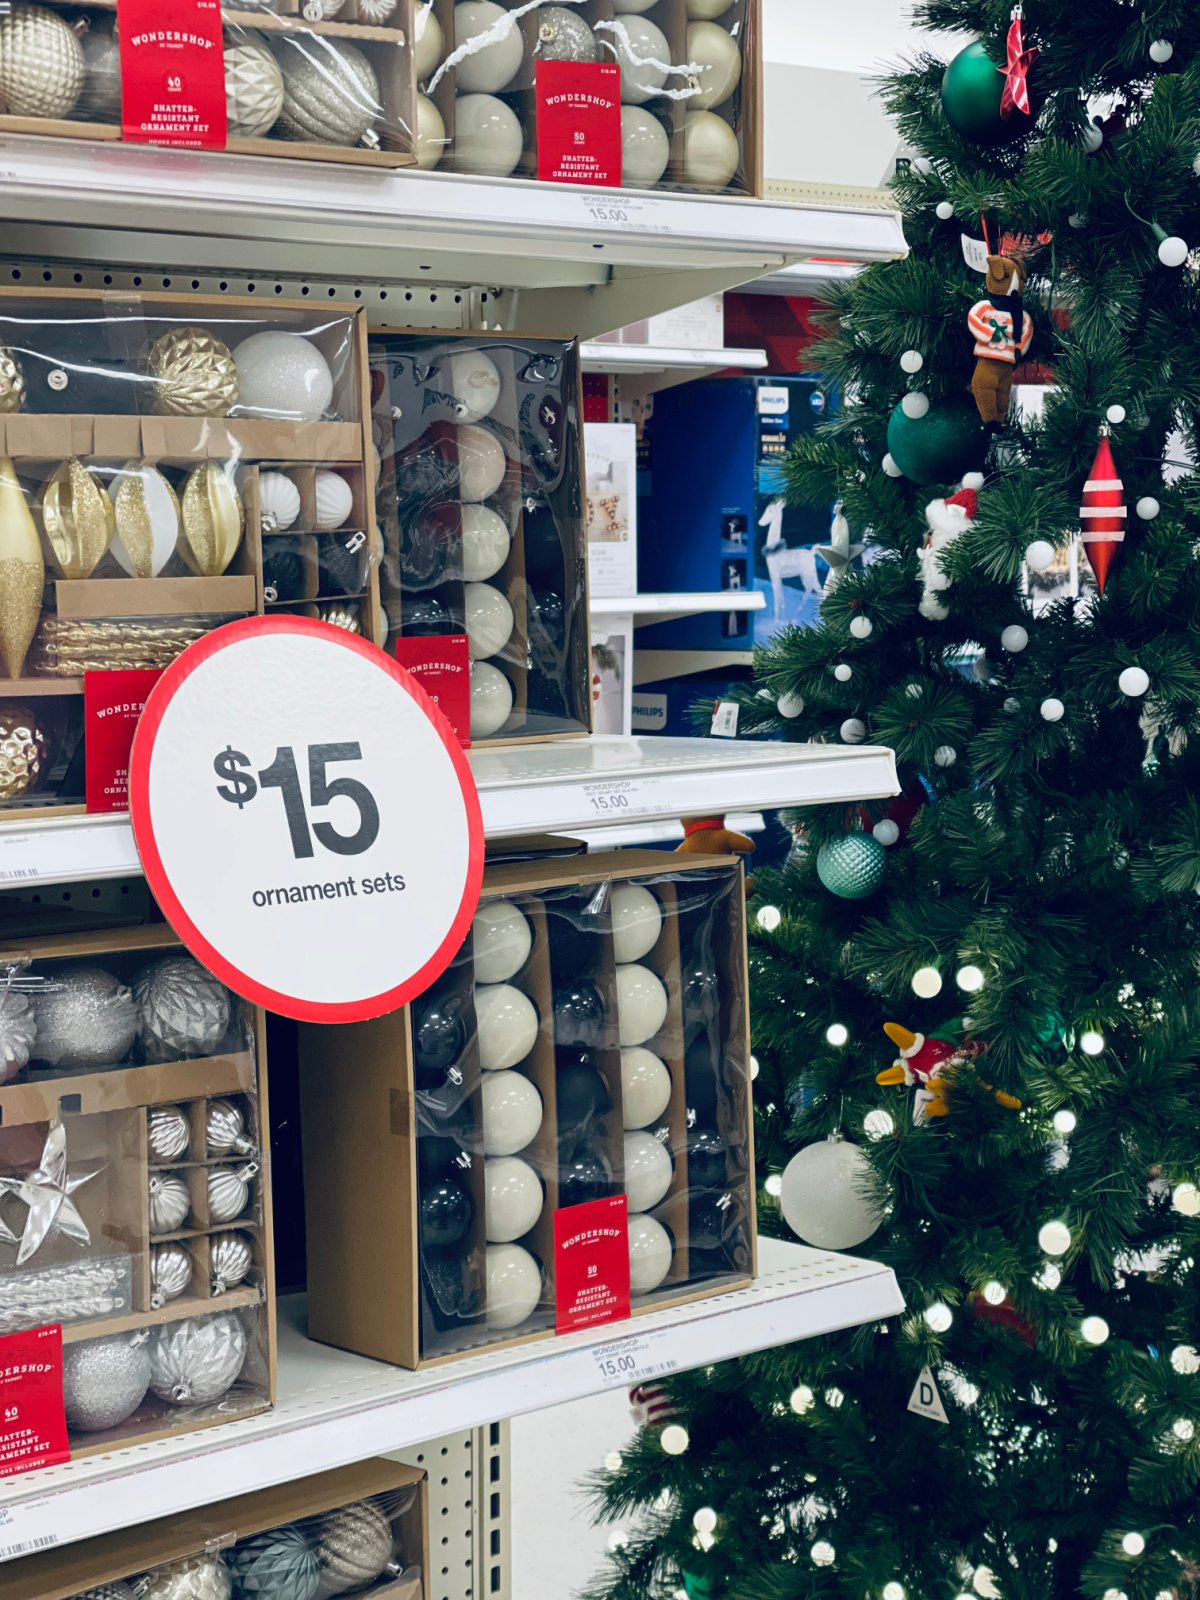 Christmas ornament sets in store marked $15 next to a decorated Christmas tree.